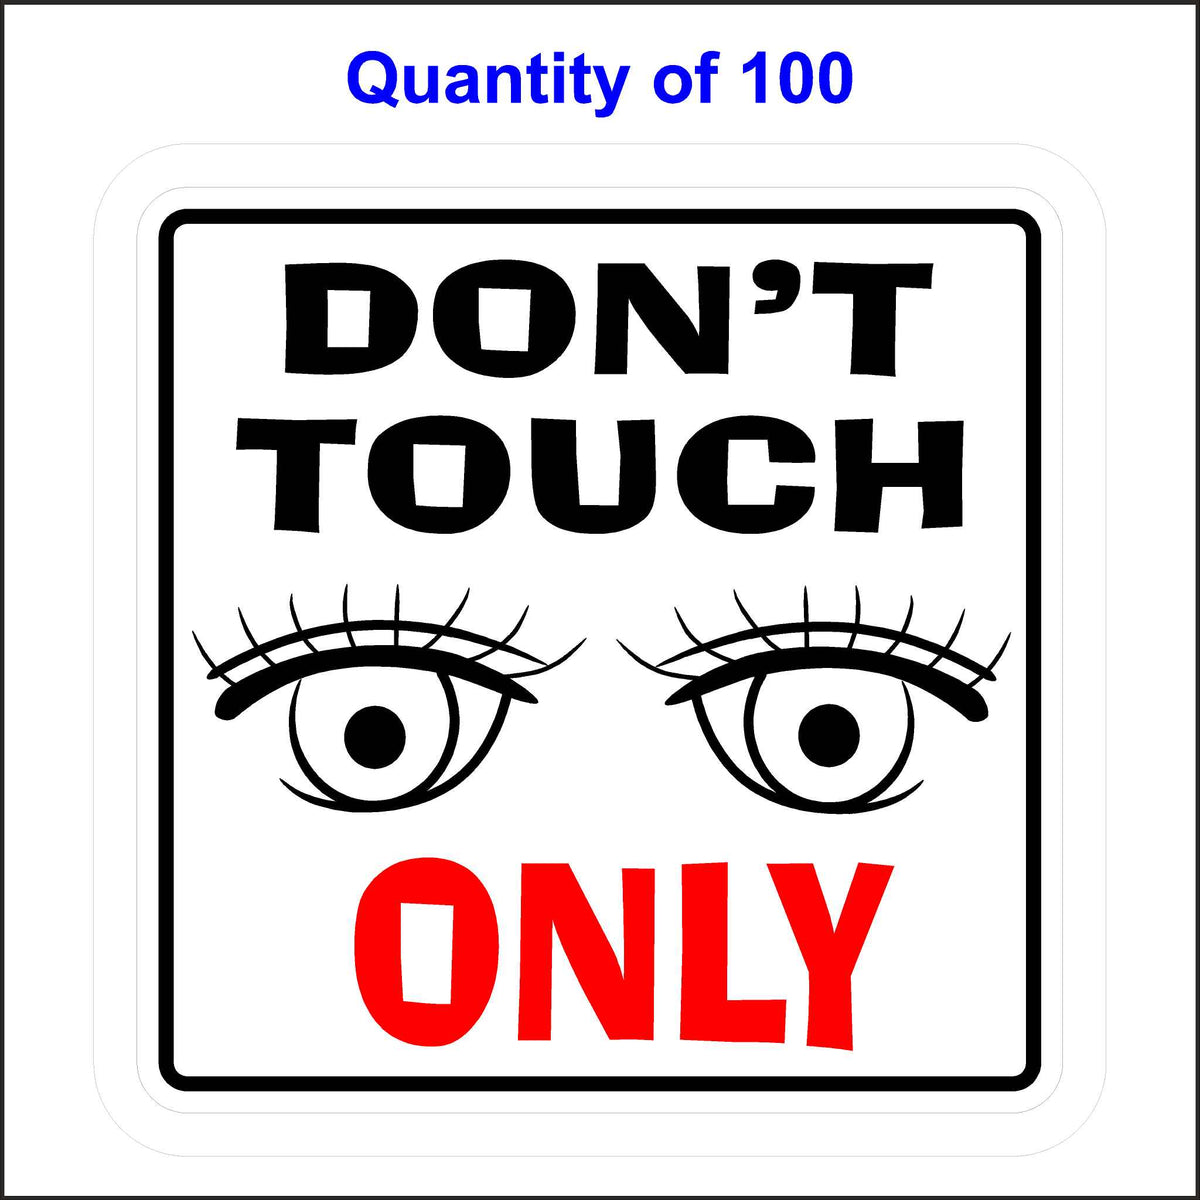 Don’t Touch, Look Only Sticker. Black and Red Text With Eyeballs Looking At You. 100 Quantity.